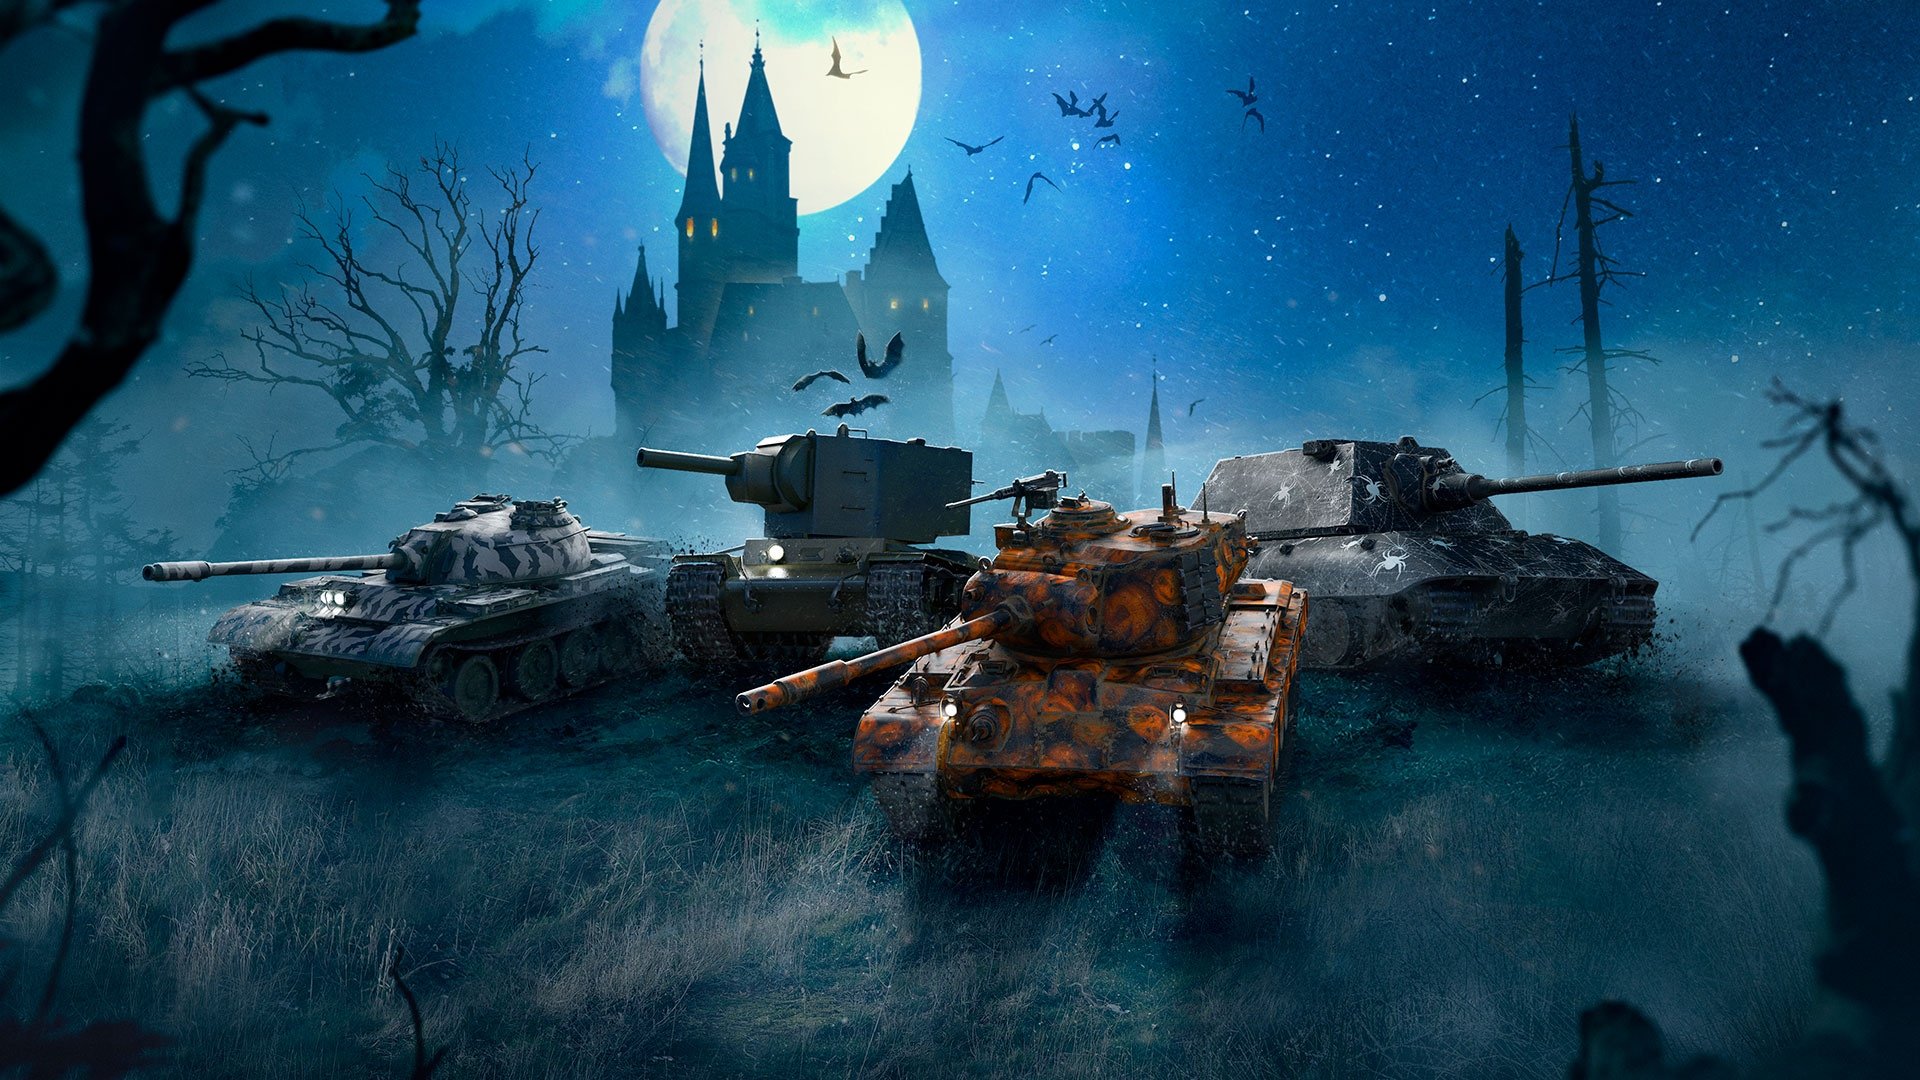 wot blitz wallpaper, action adventure game, strategy video game, pc game, combat vehicle, tank, cg artwork, games, adventure game, vehicle, world